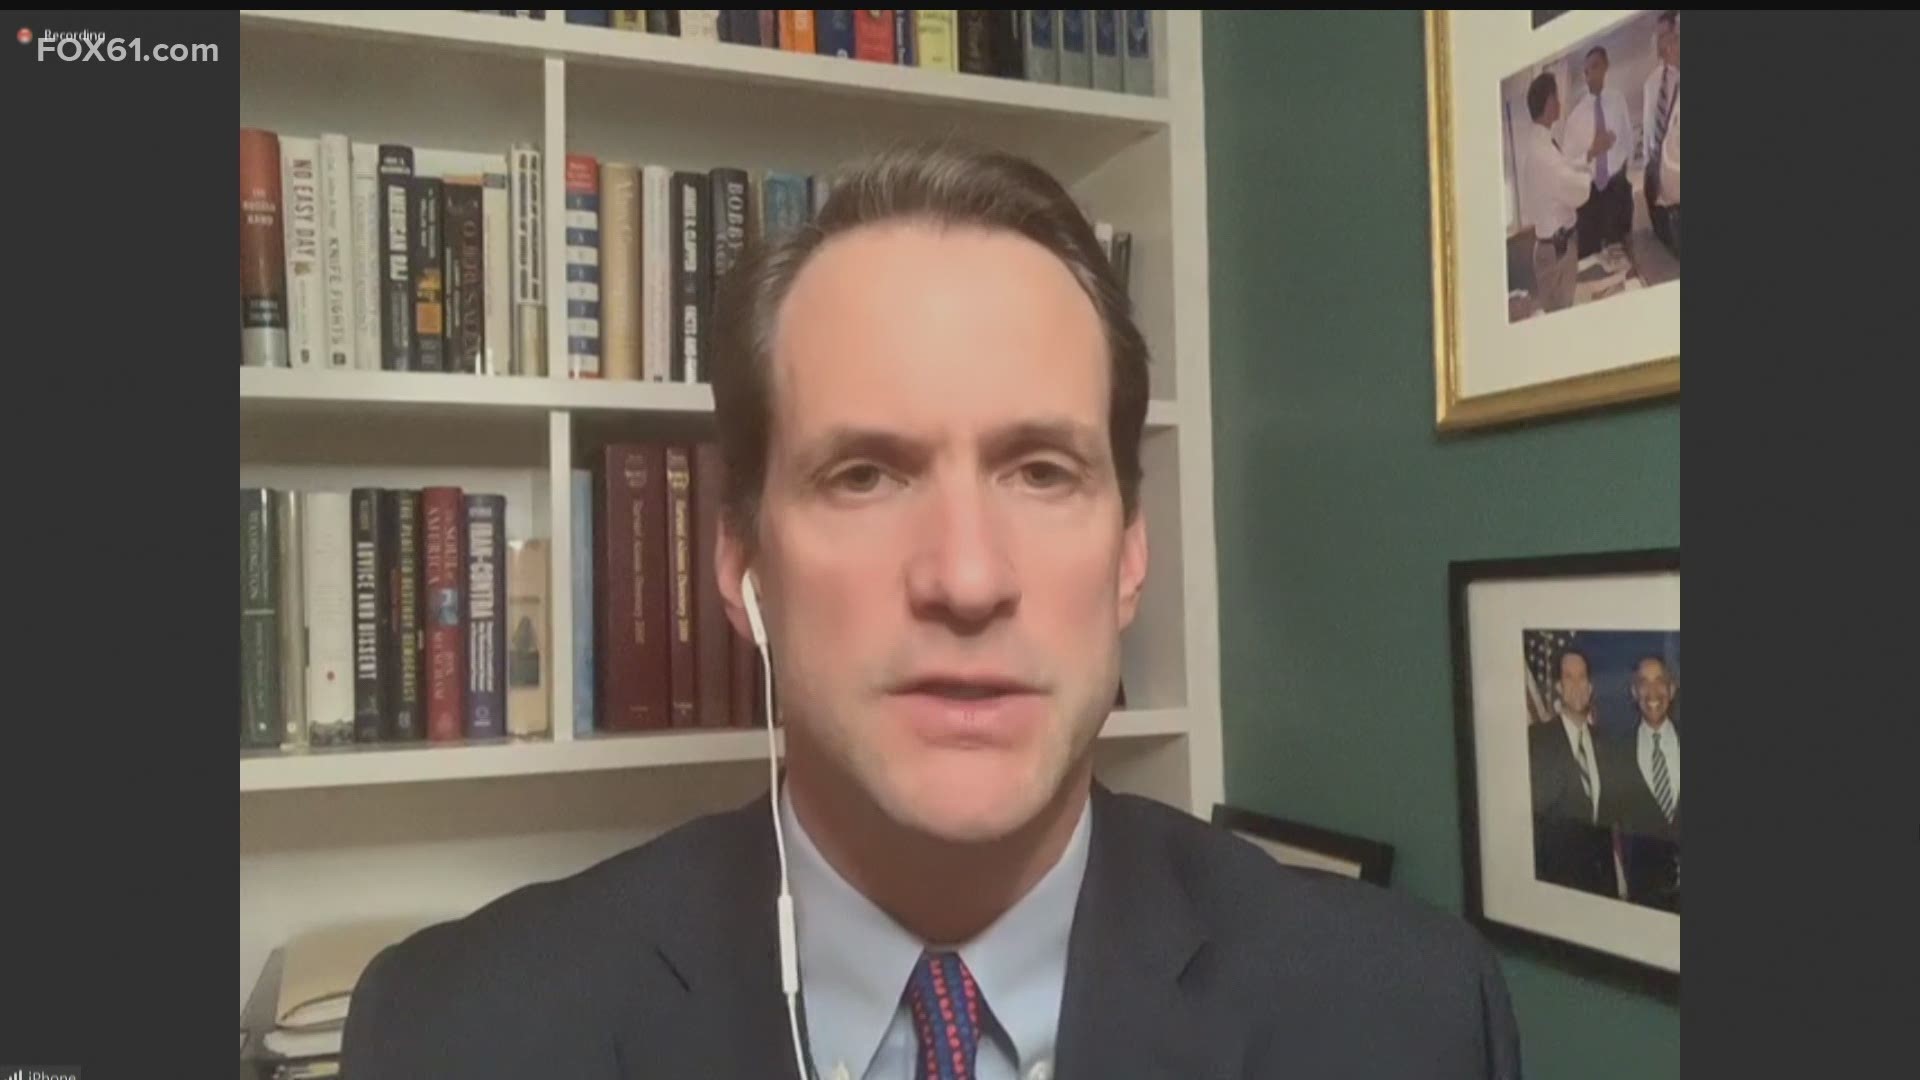 Himes represents the Fourth US Congressional District